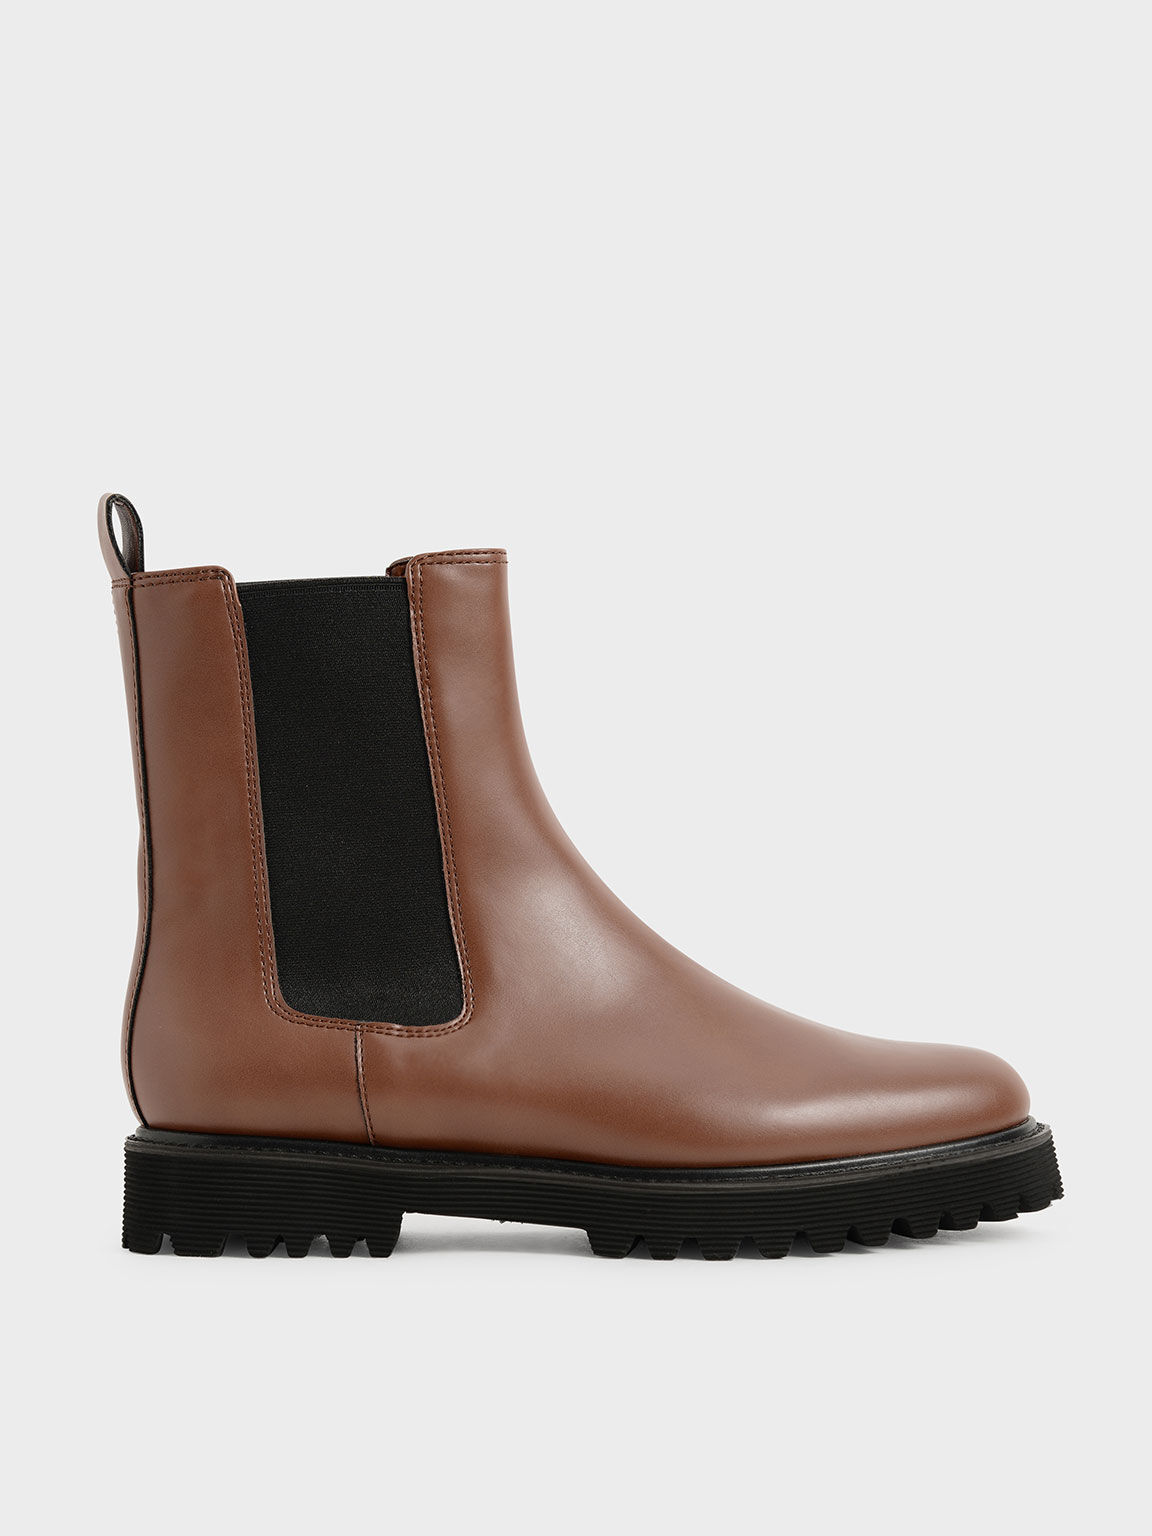 Cognac Cleated Sole Boots - CHARLES & KEITH US